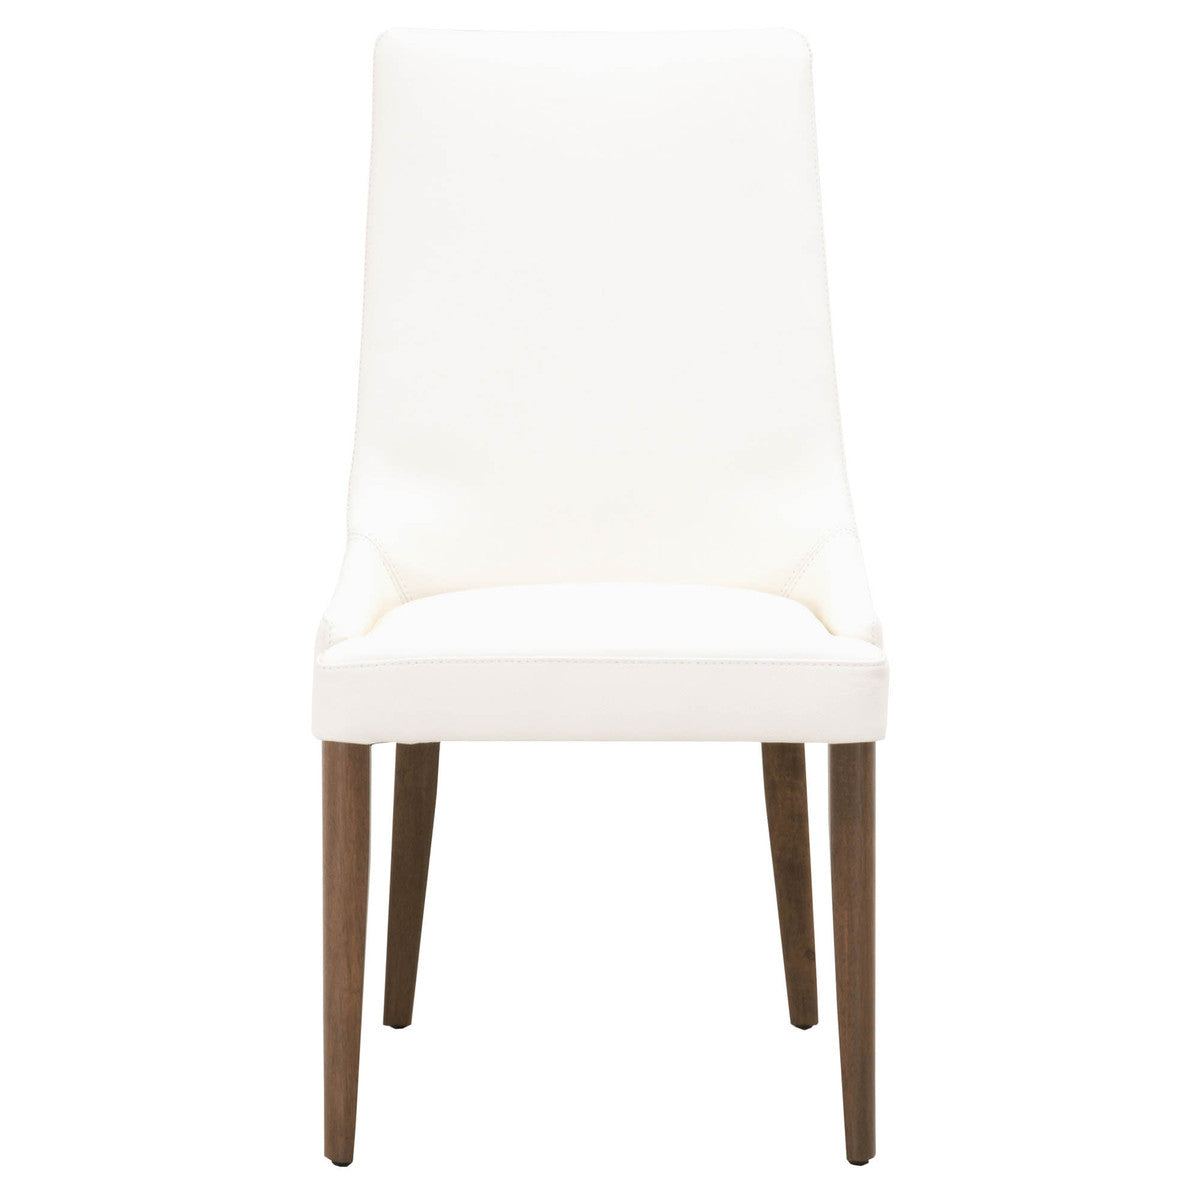 Aurora Dining Chair in Alabaster Top Grain Leather, Walnut, Set of 2 - 5131.ALA/WAL